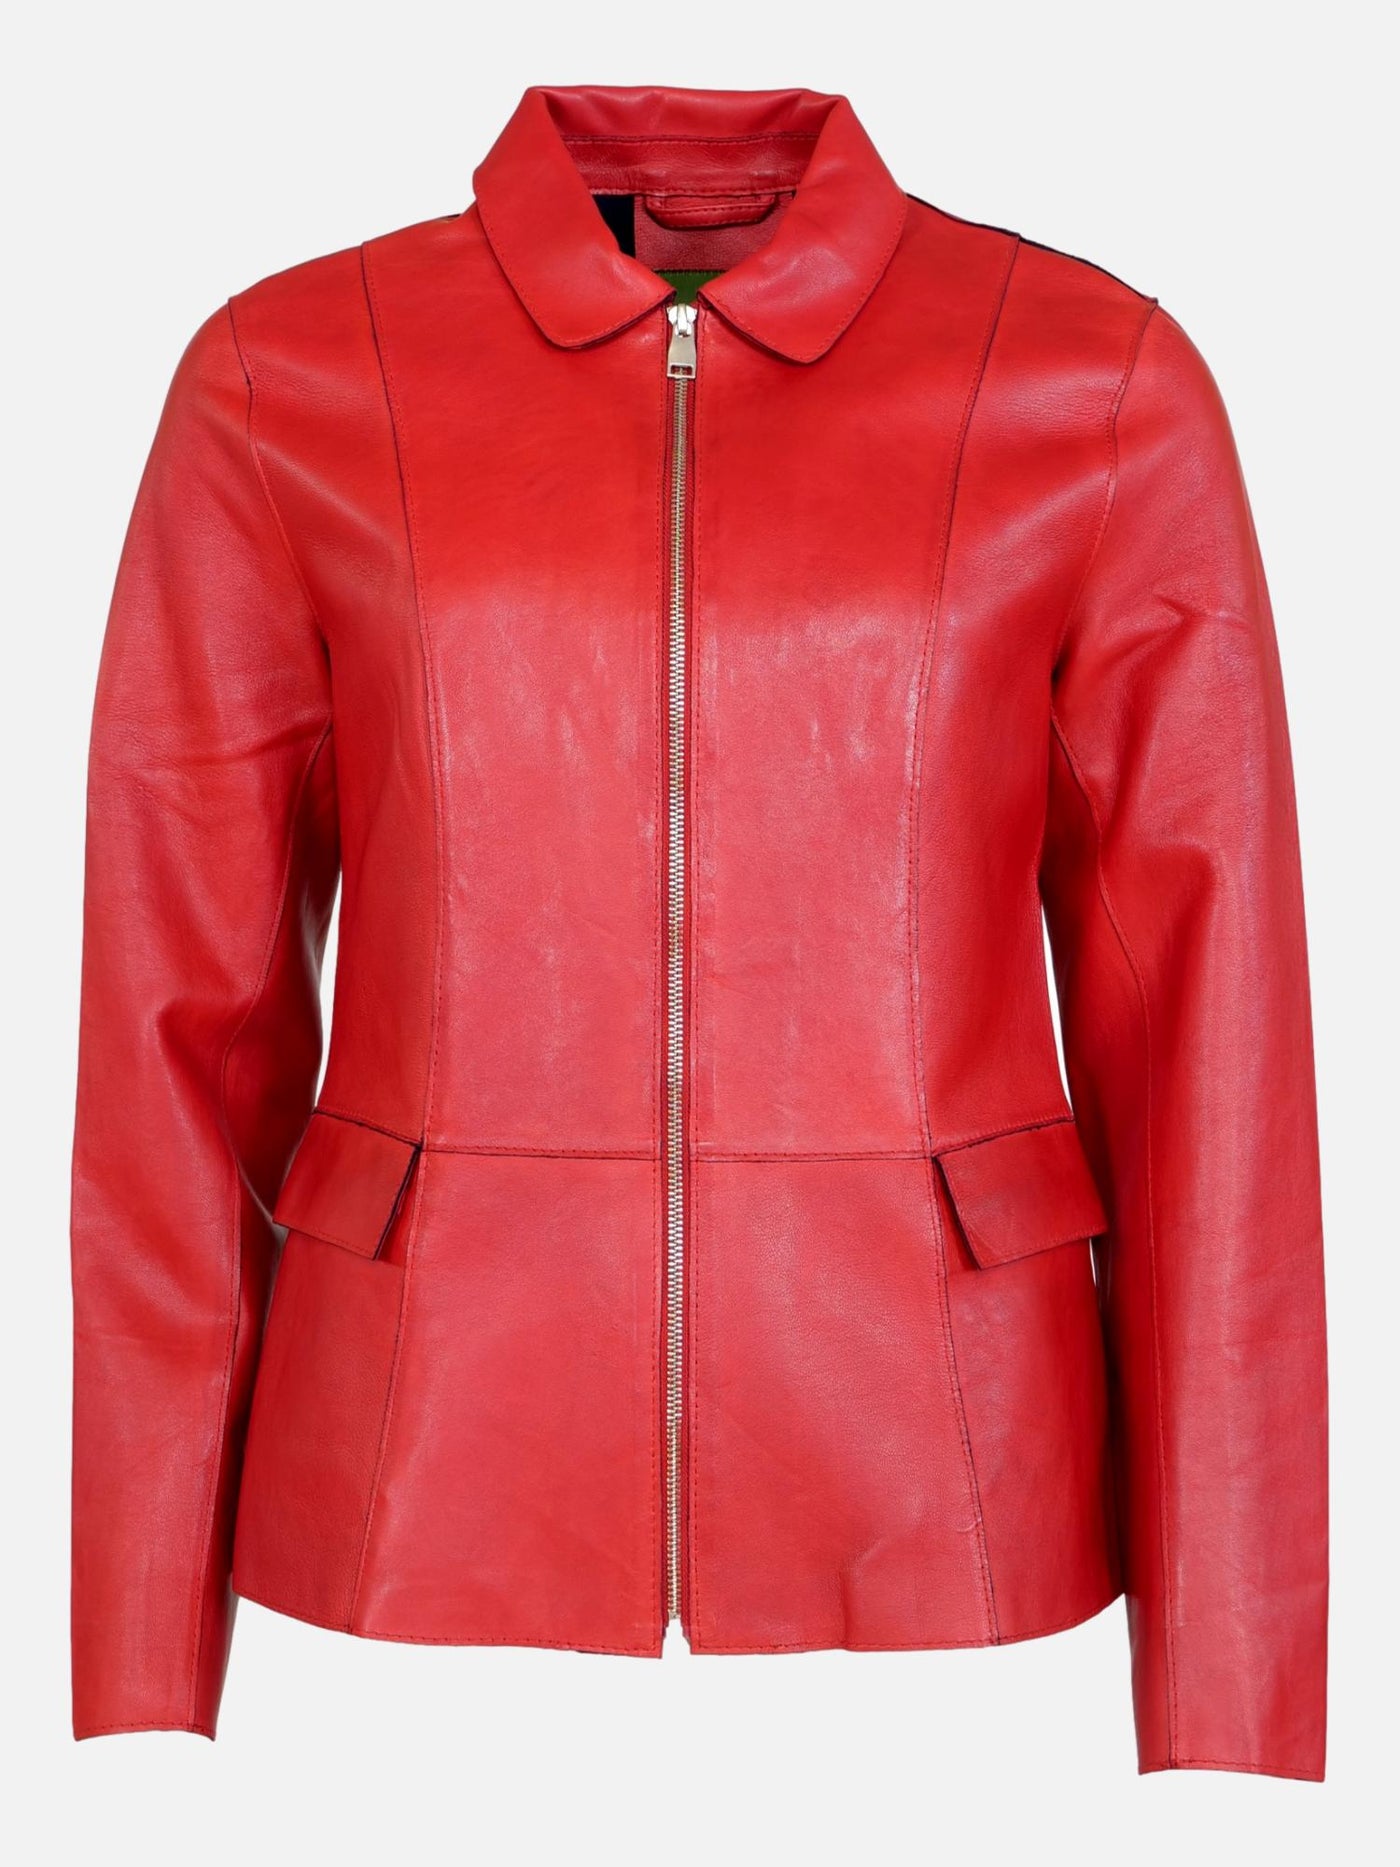 Lysaine - Leather & Farbric - Women - Fire Red